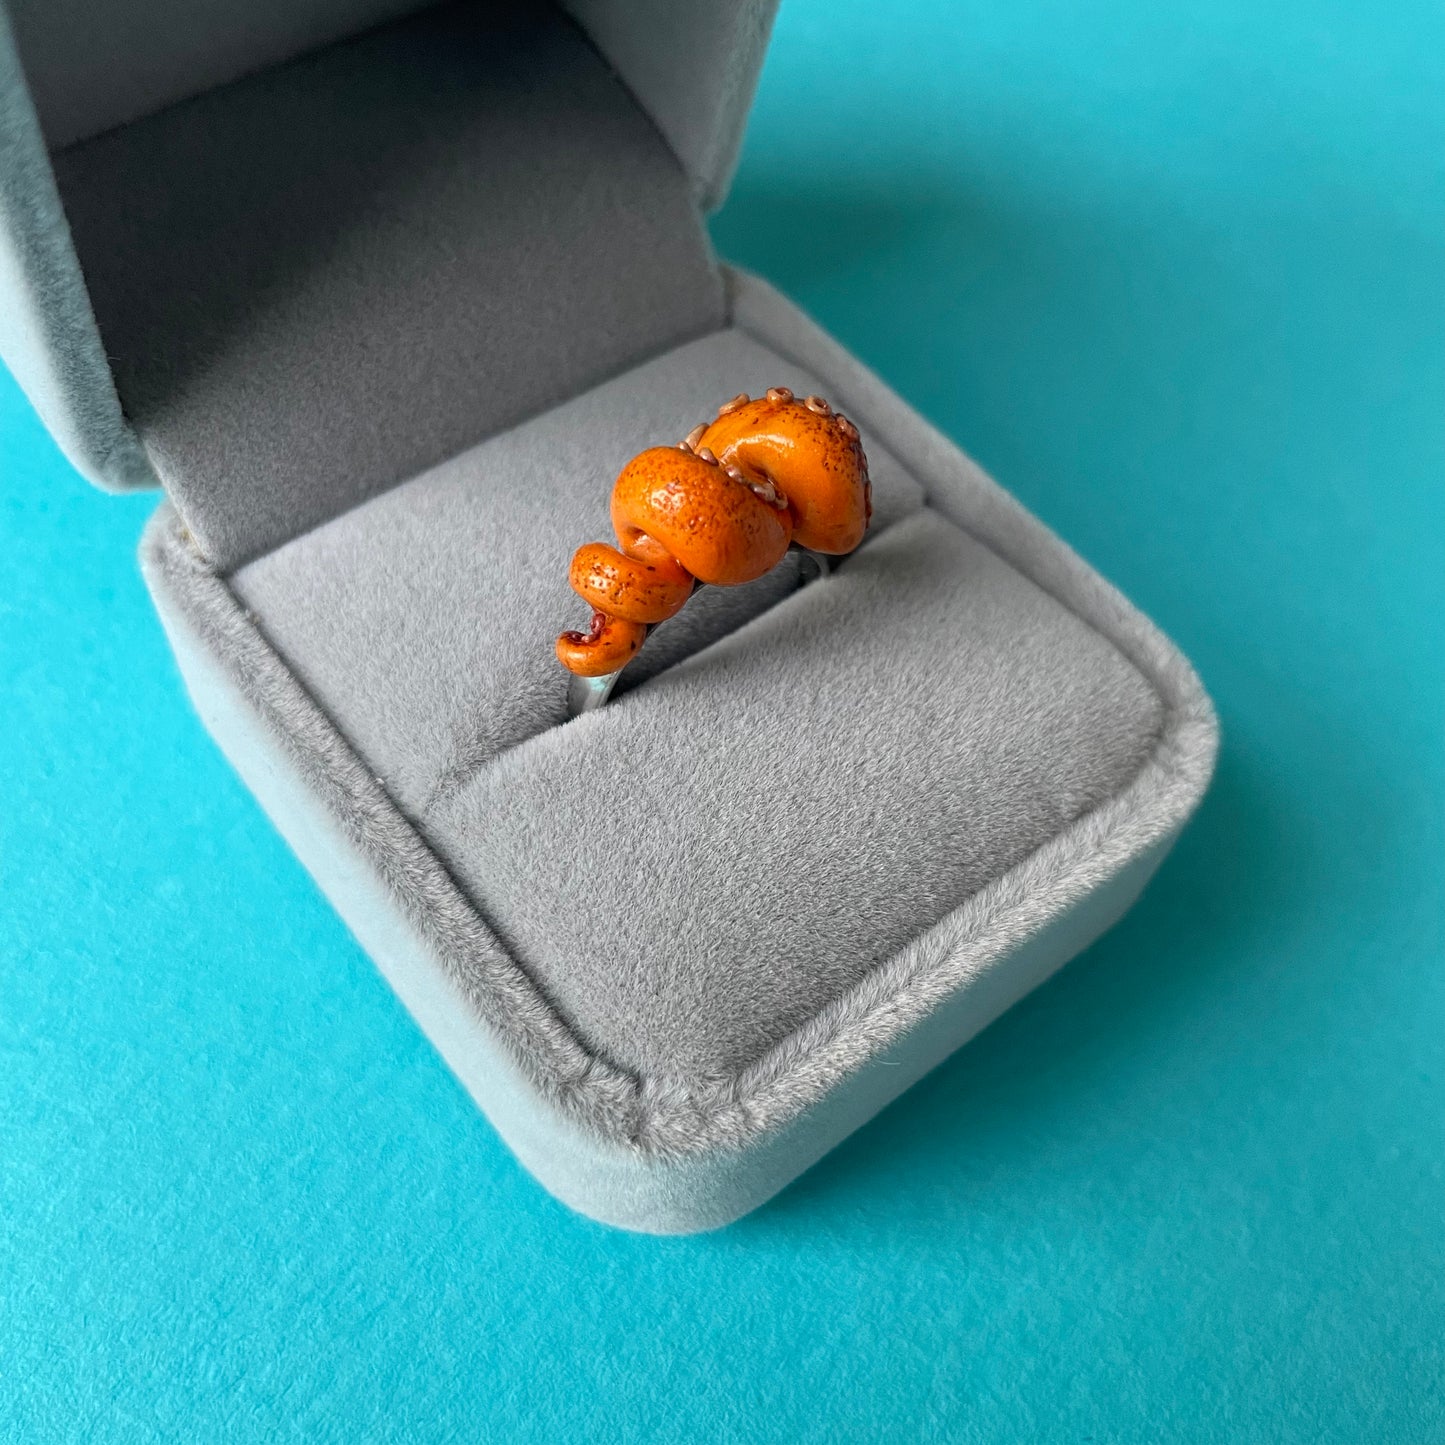 Tangy - Tentacle ring